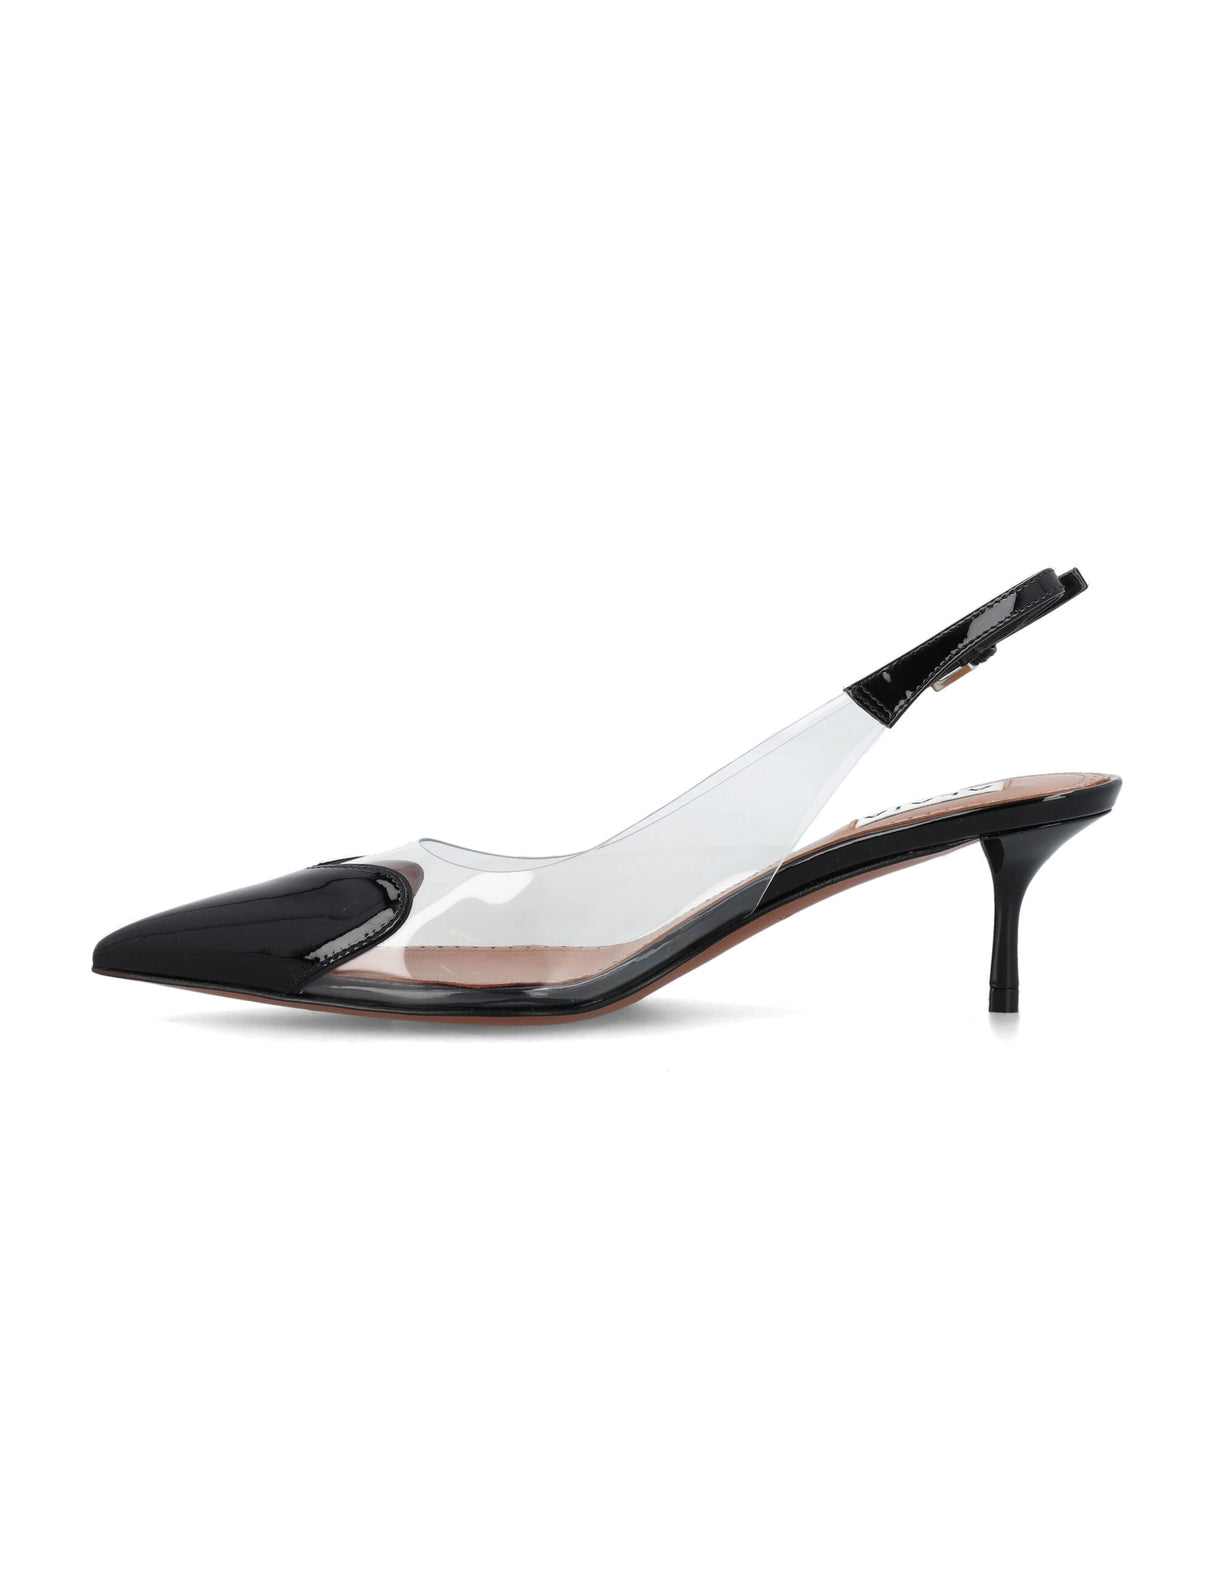 ALAIA Black Heart Sling Back Pumps for Women - FW24 Collection